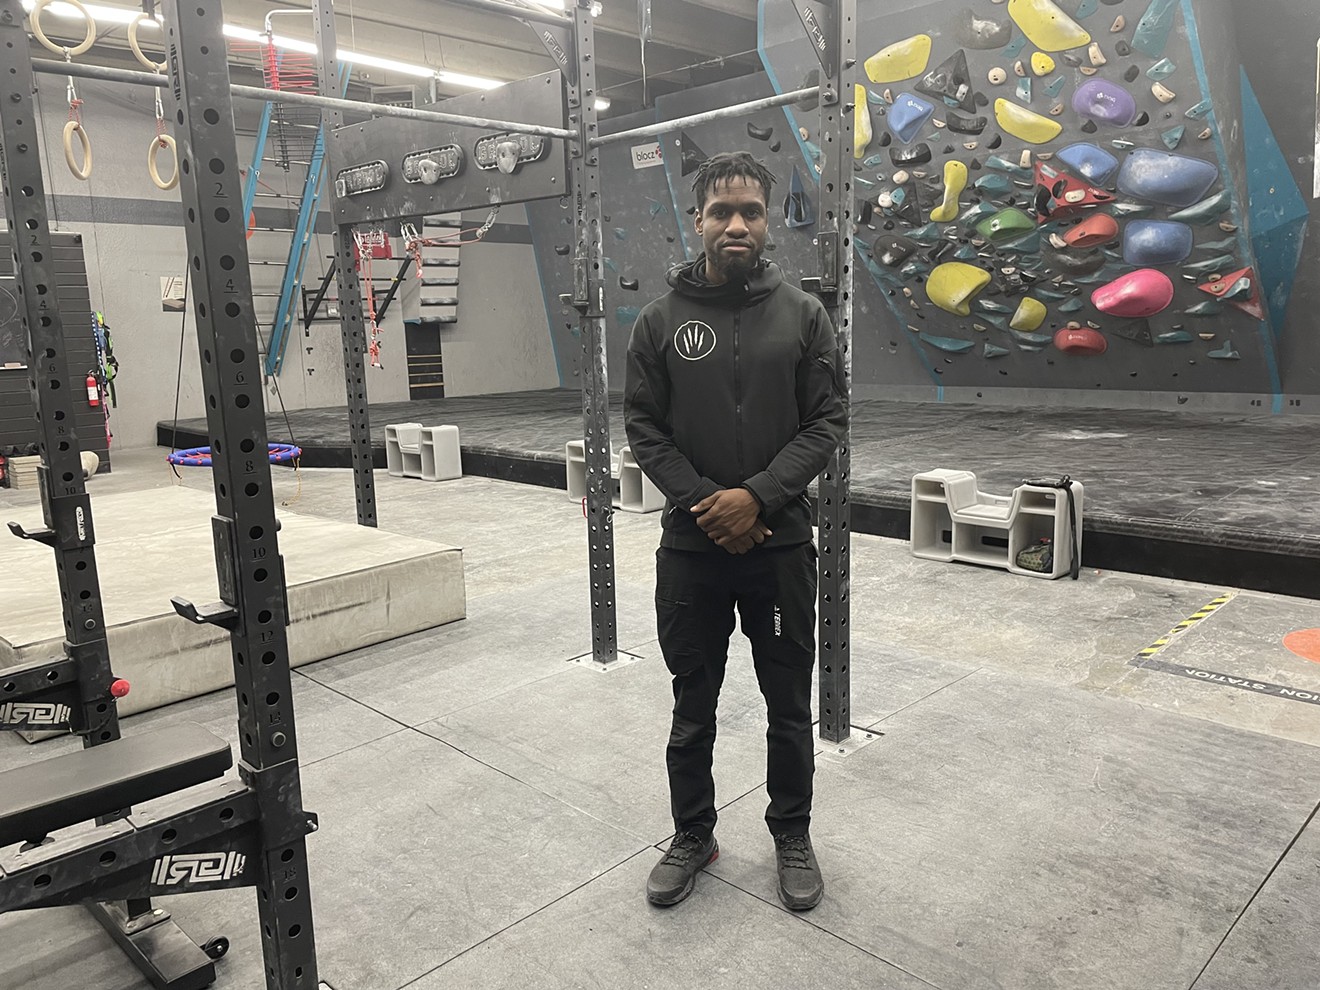 Aman Anderson is the owner and operator of Beast Fingers Climbing Gym.